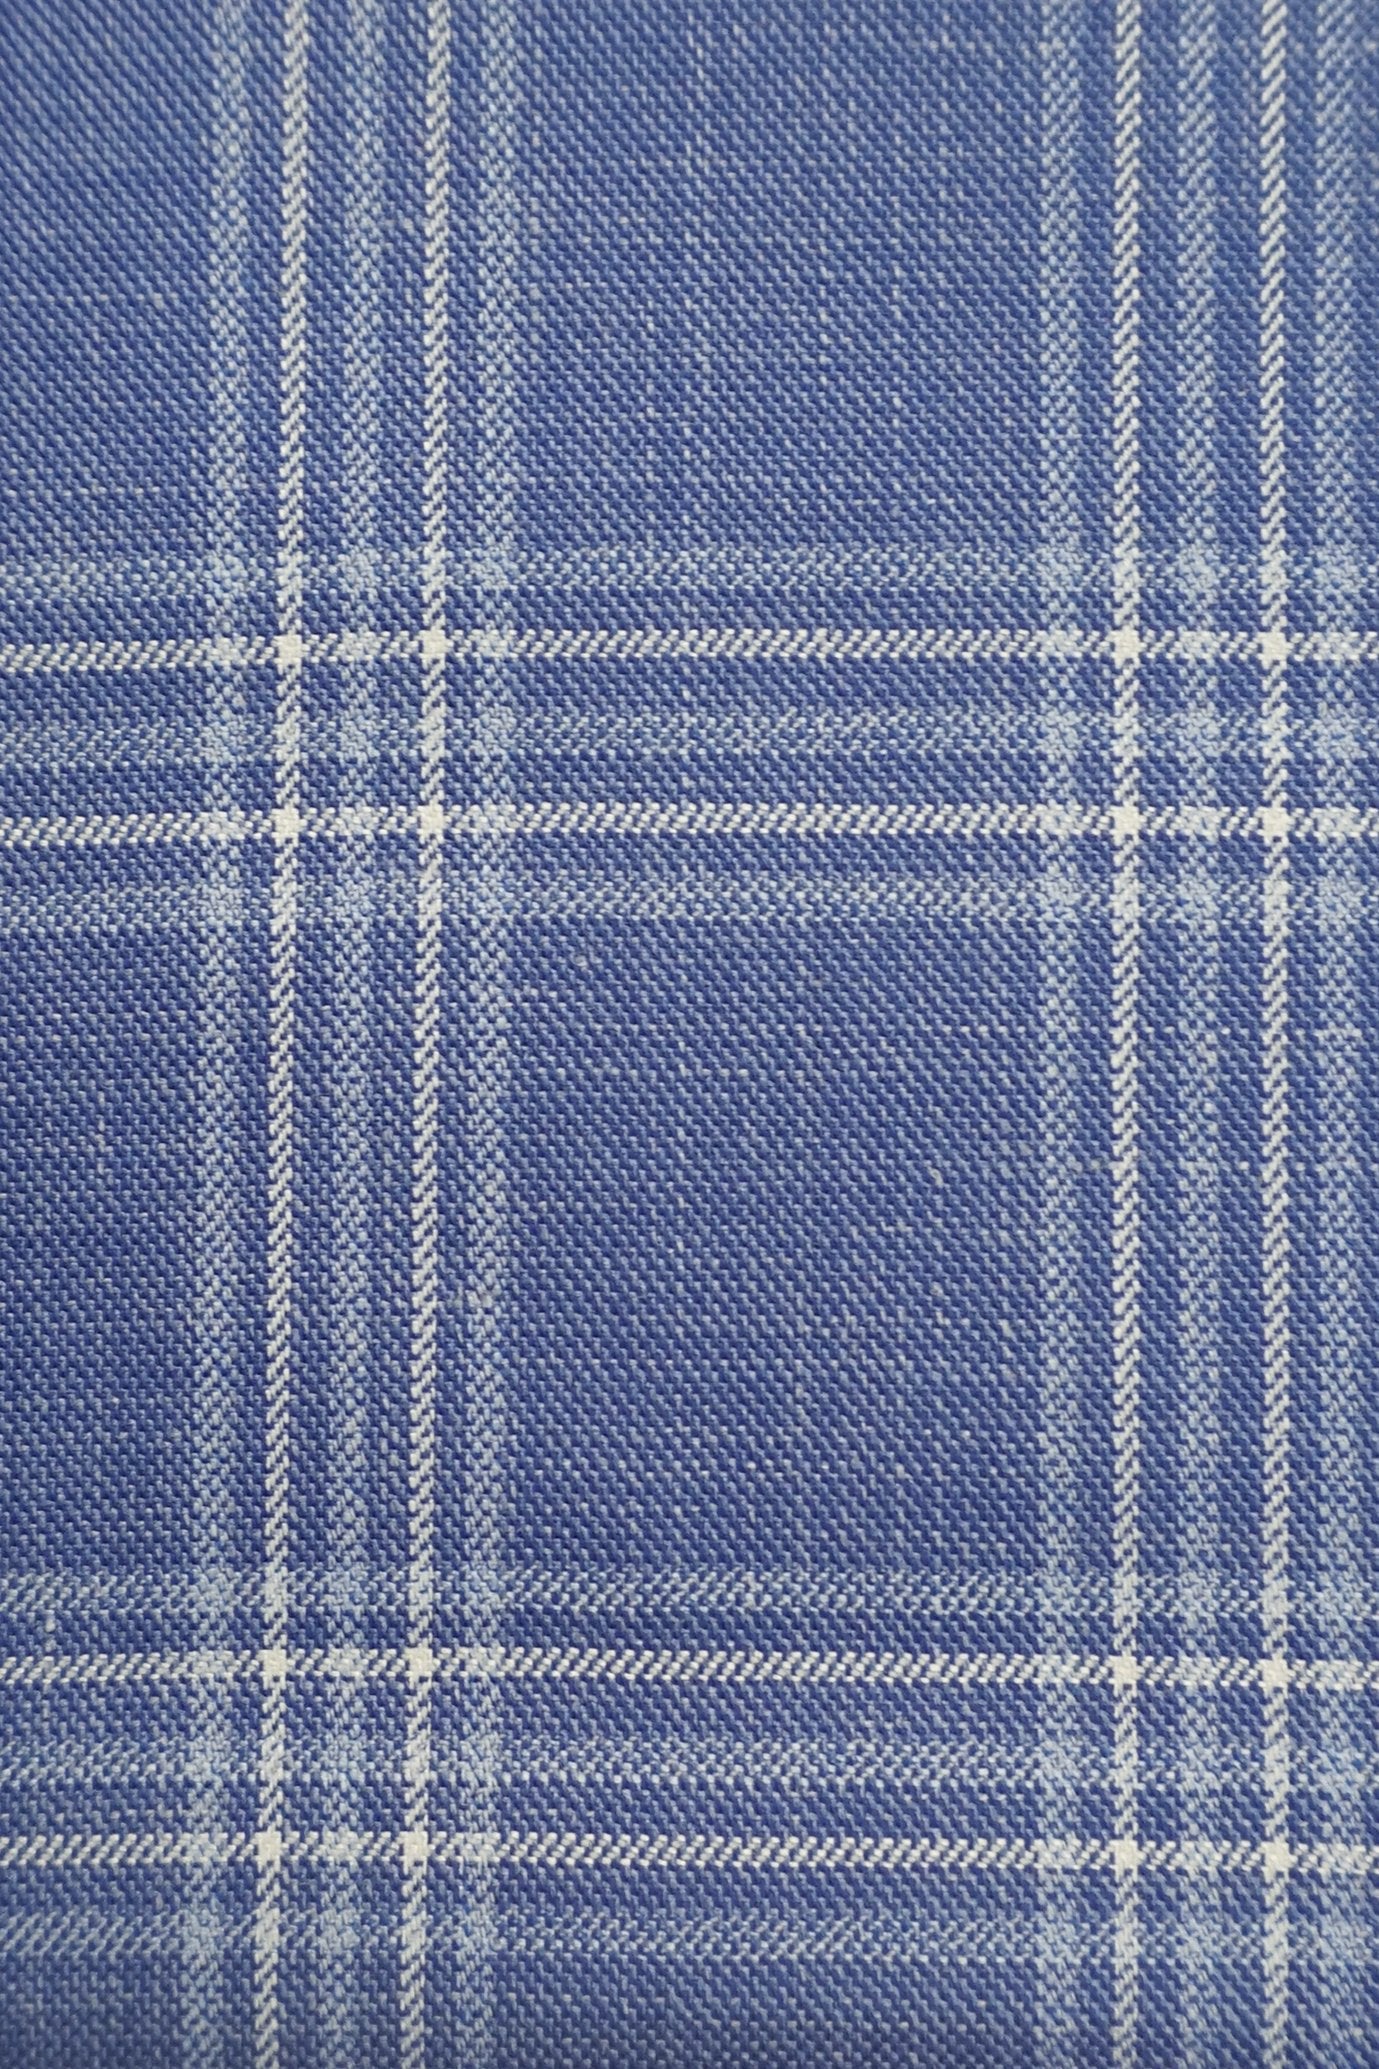 
                  
                    Blue Checks Wool Silk Linen Suit Fabric Swatch Made in Italy
                  
                